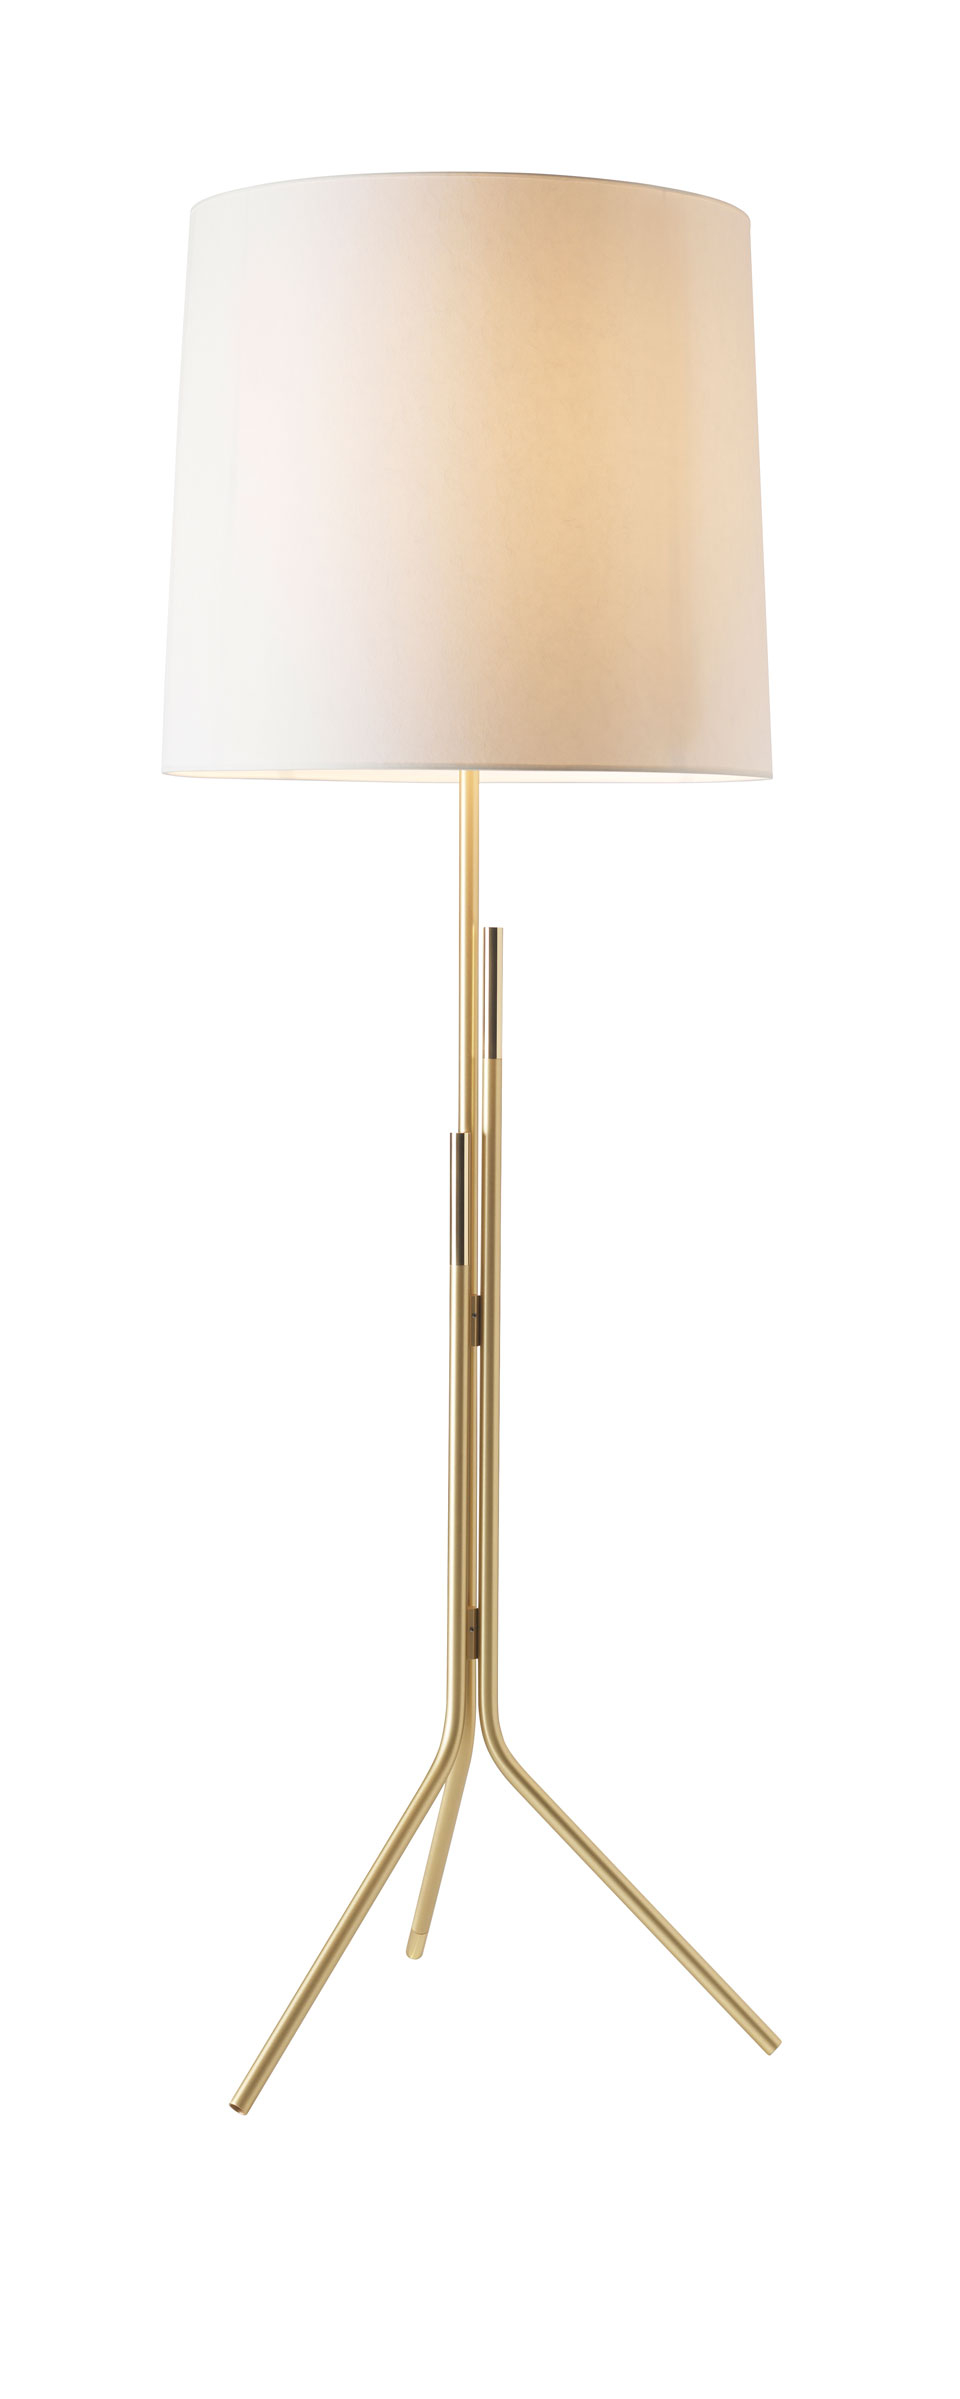 Contemporary Floor Lamp Brass Stand Cylindrical Shade In White Drop Paper Design Herv Langlais throughout sizing 960 X 2399